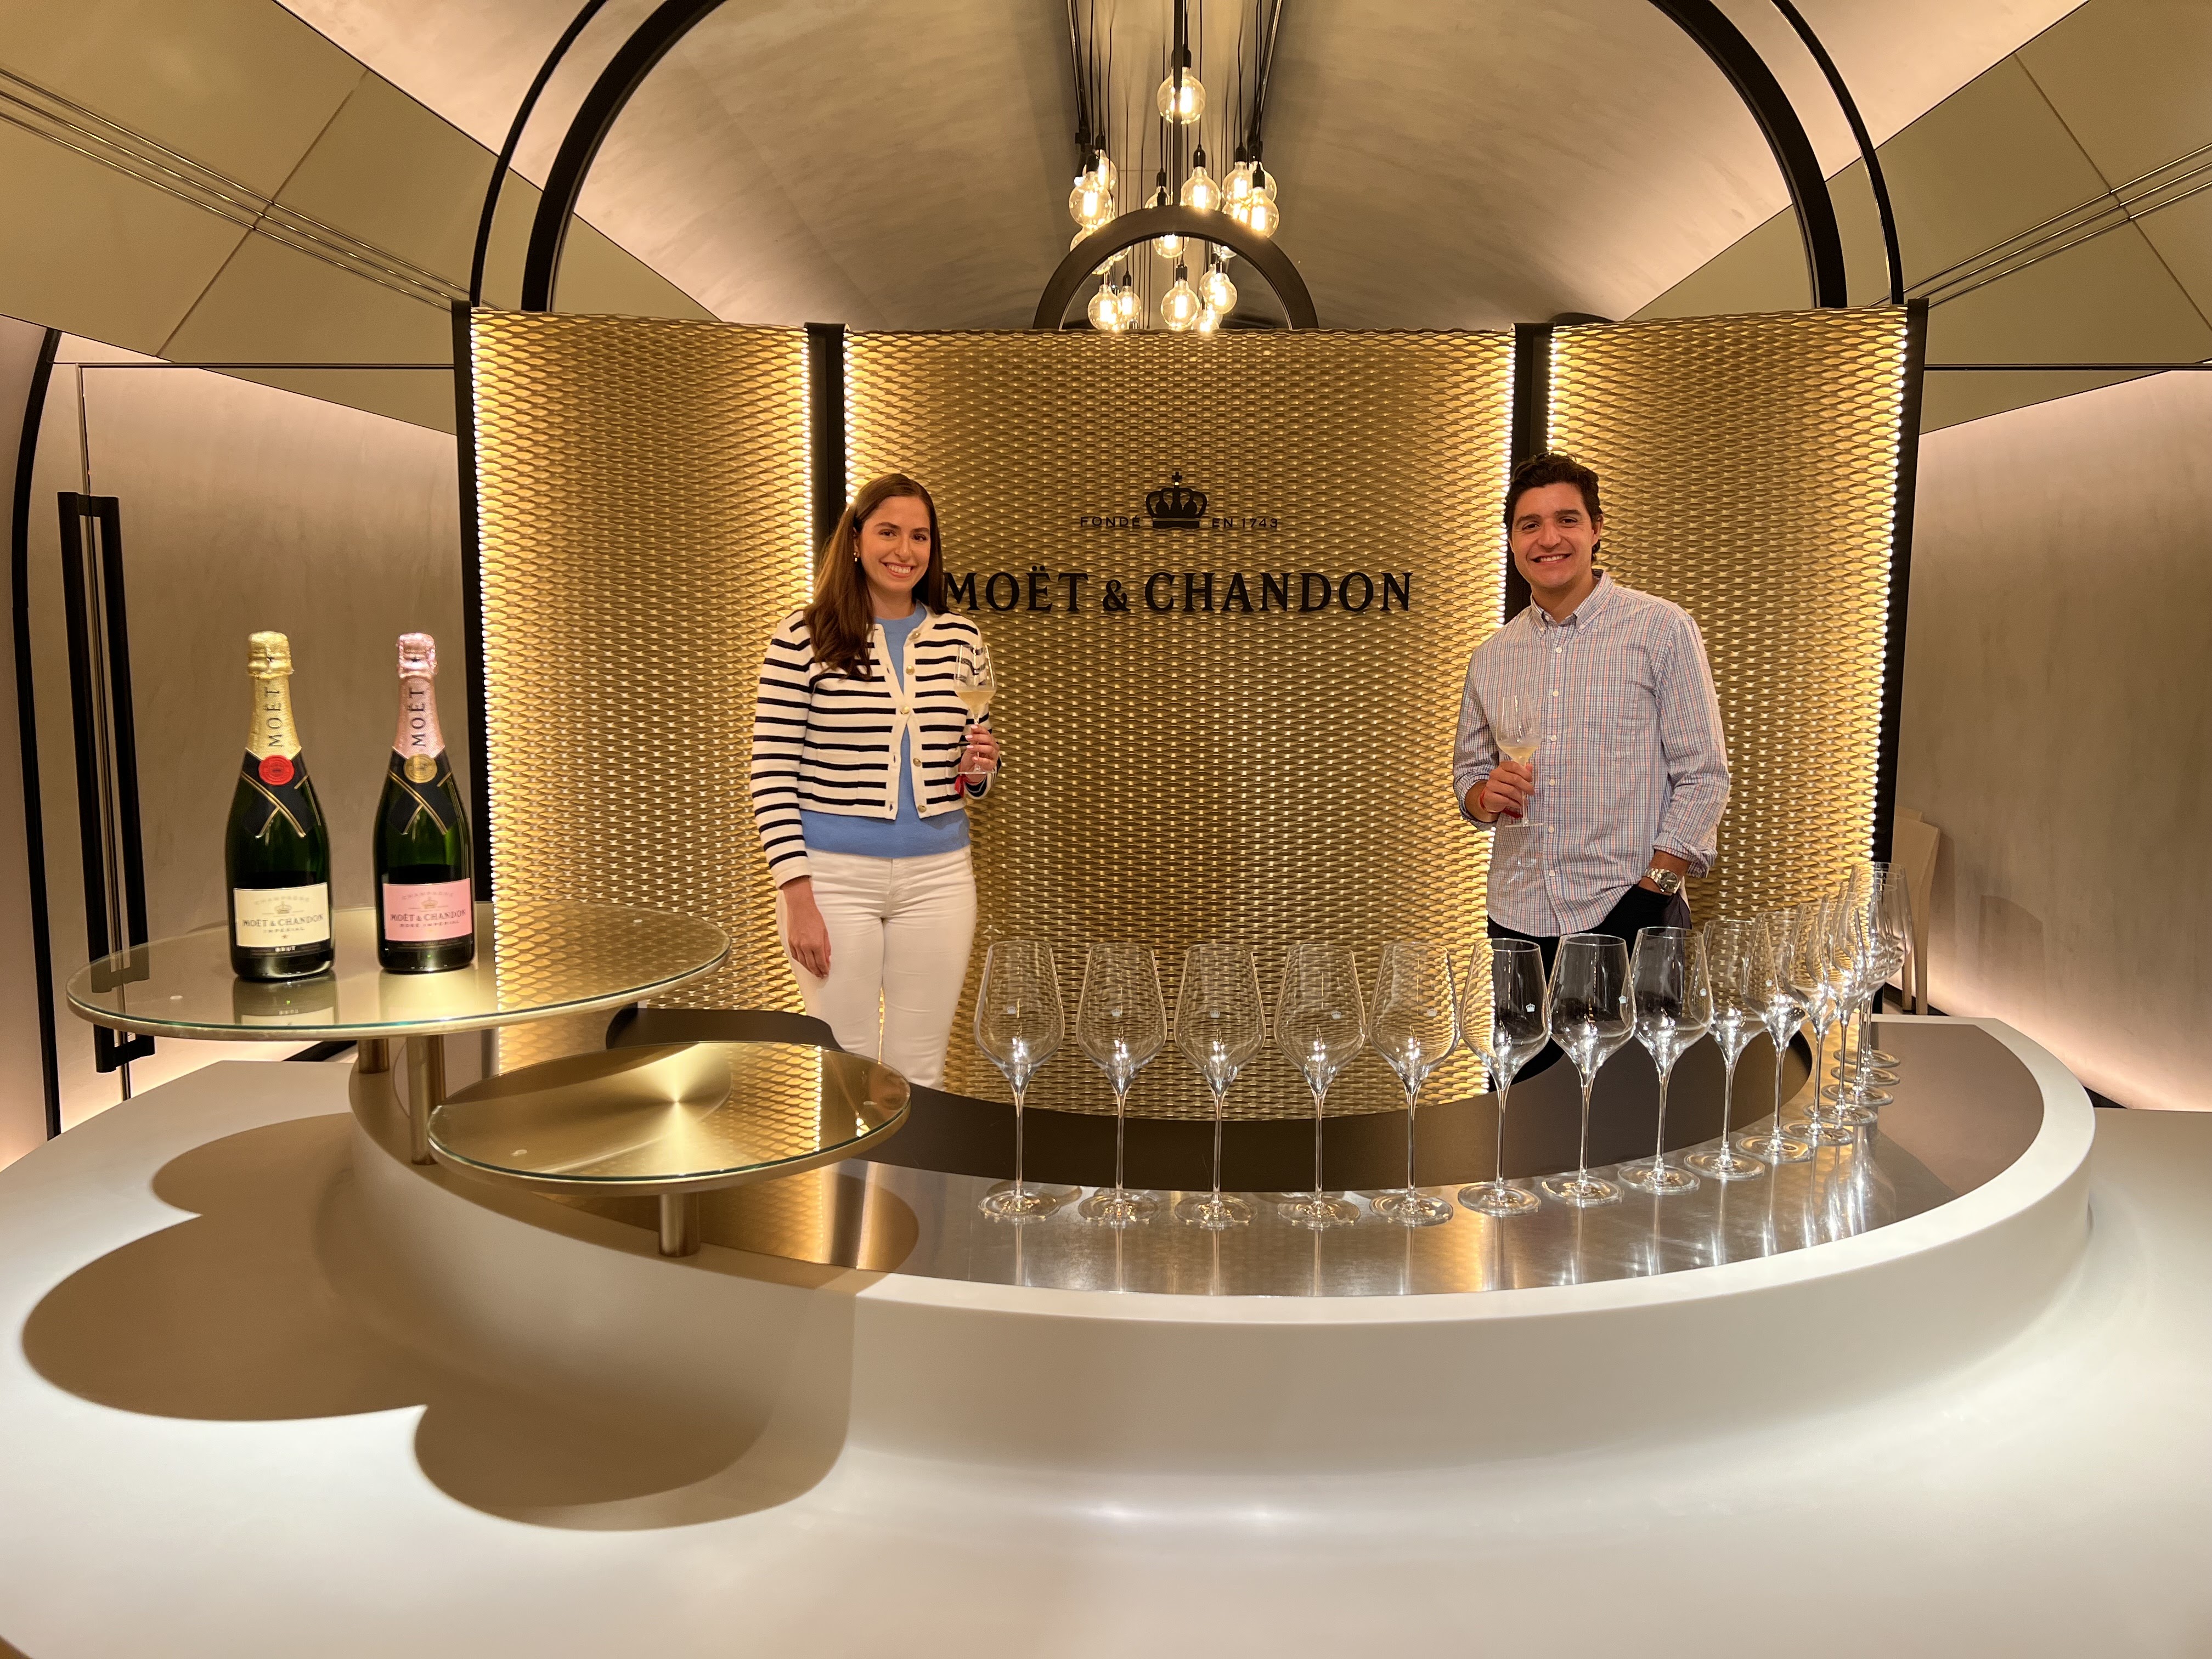 champagne tastings, france, paris day trips, champagne france, moet, veuve clicquot, french champagne house